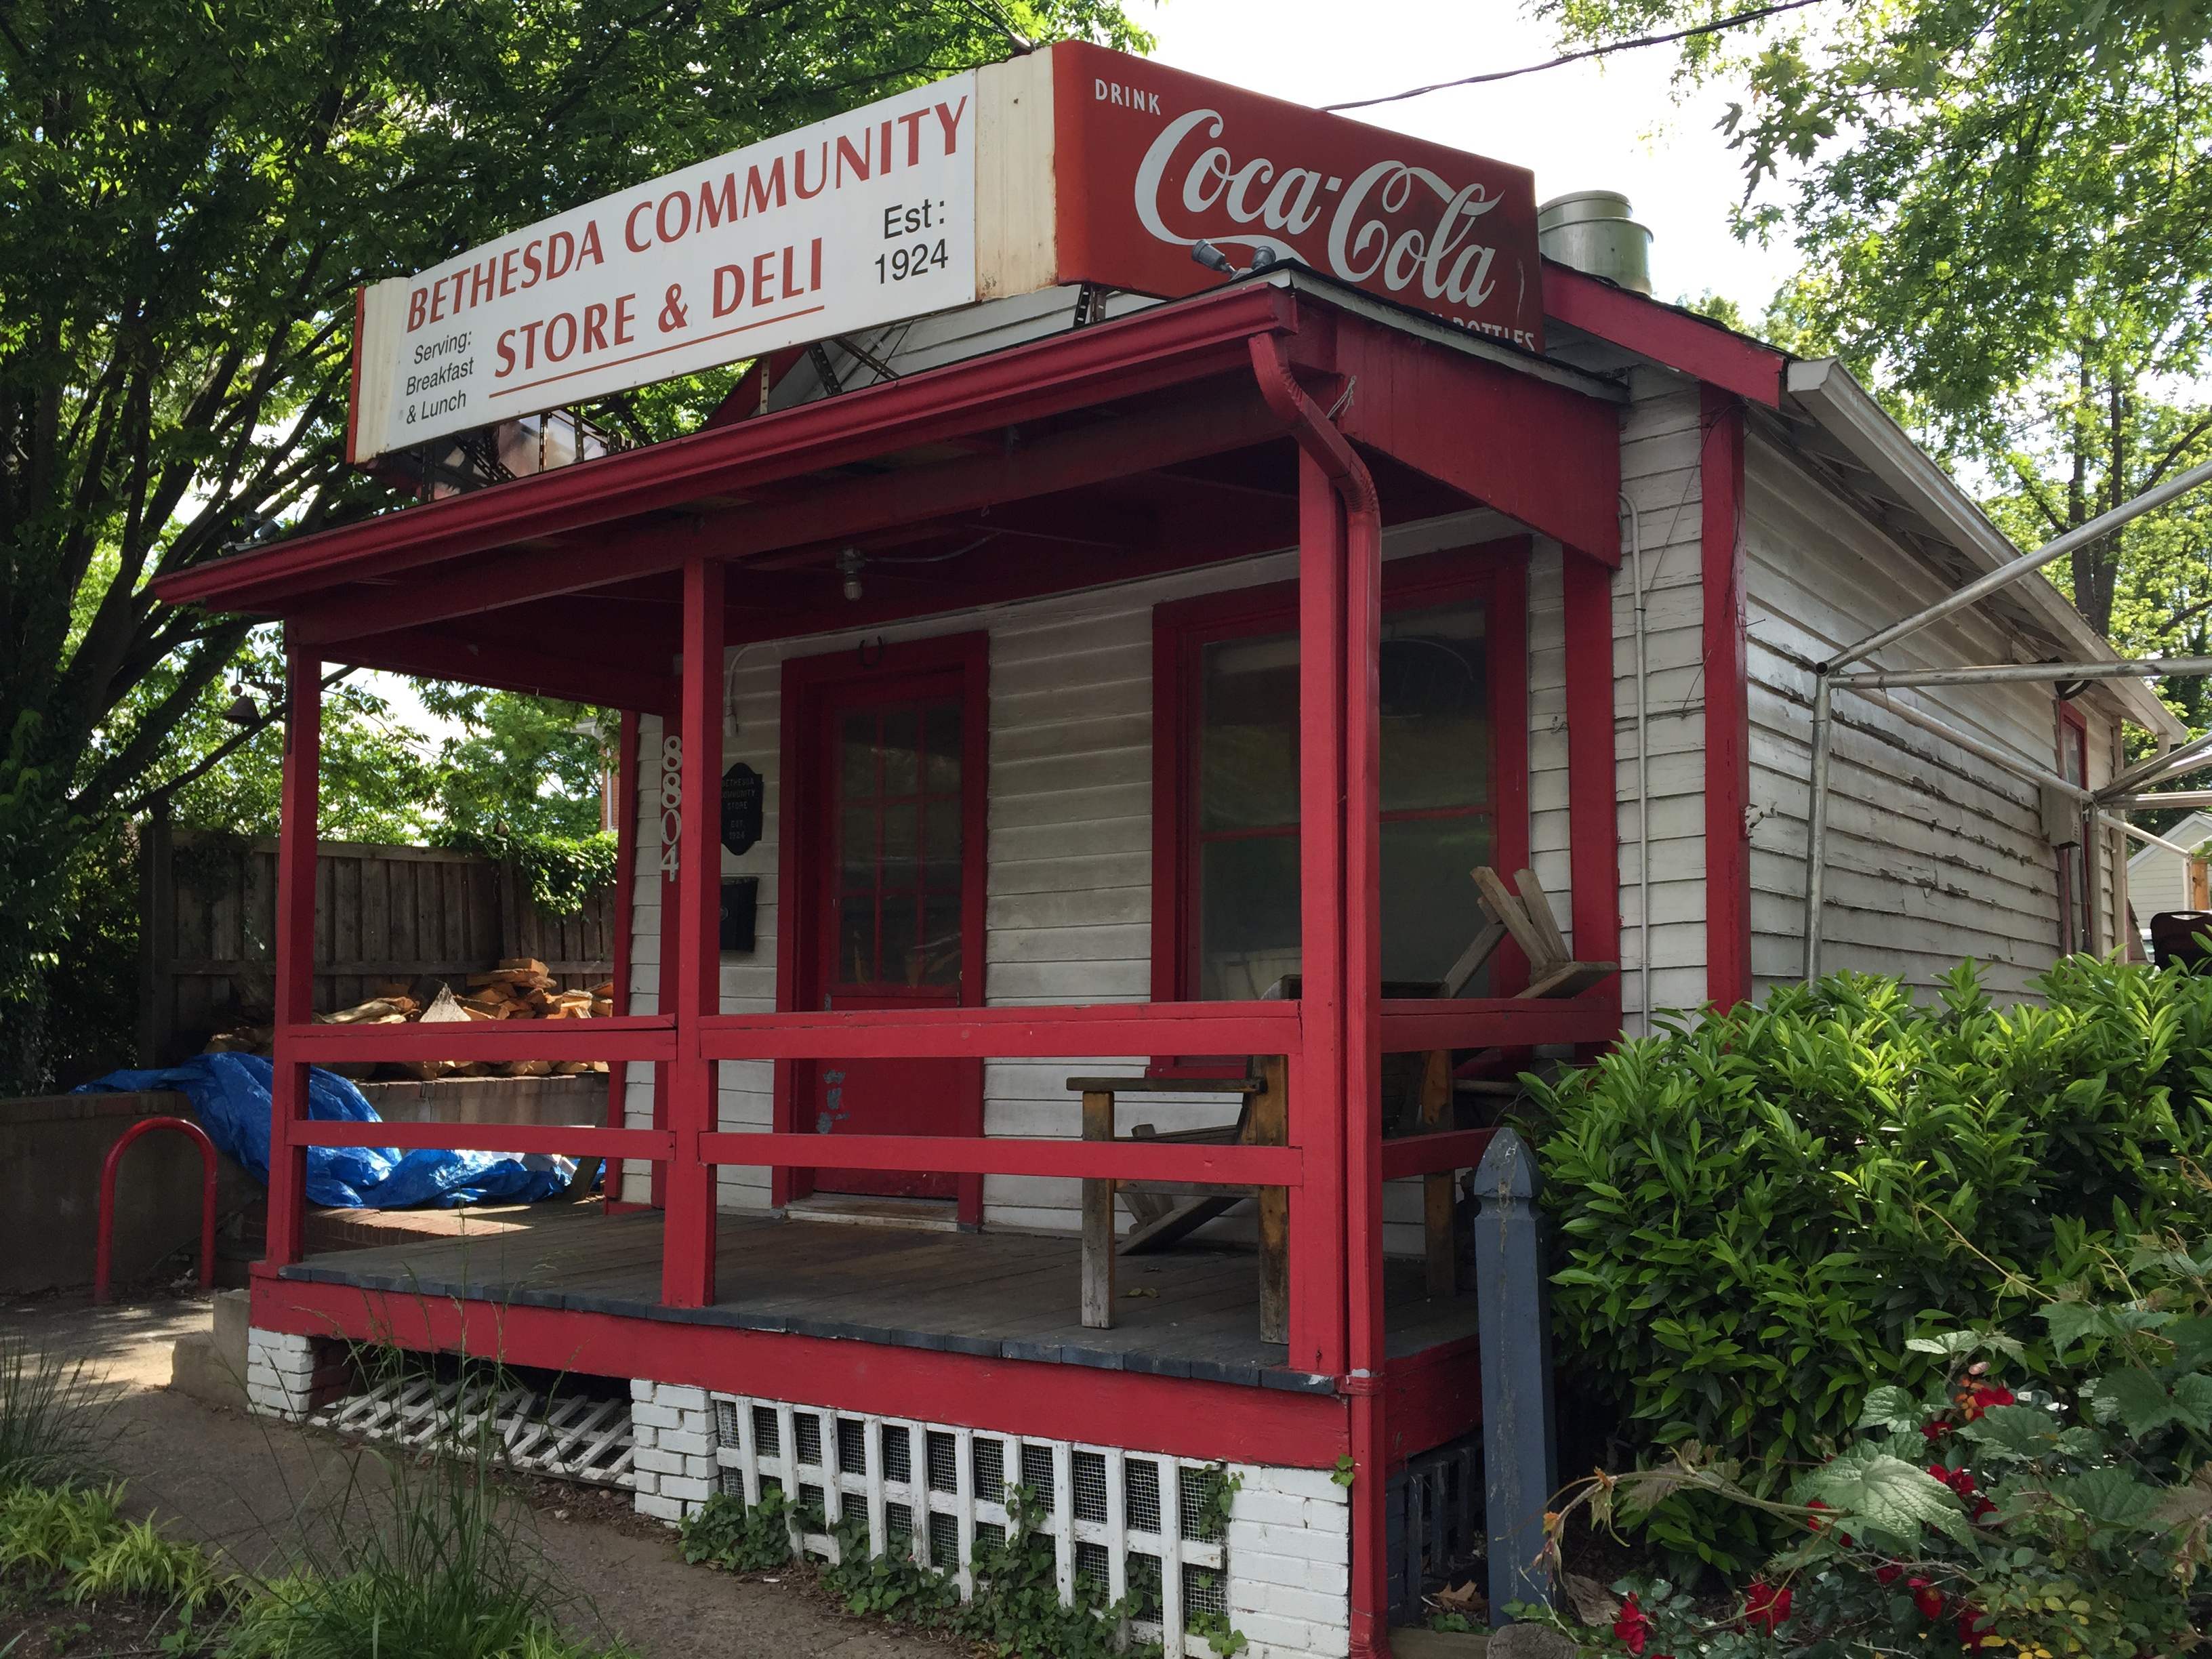 Tiny Md. restaurant closes its doors after 92 years